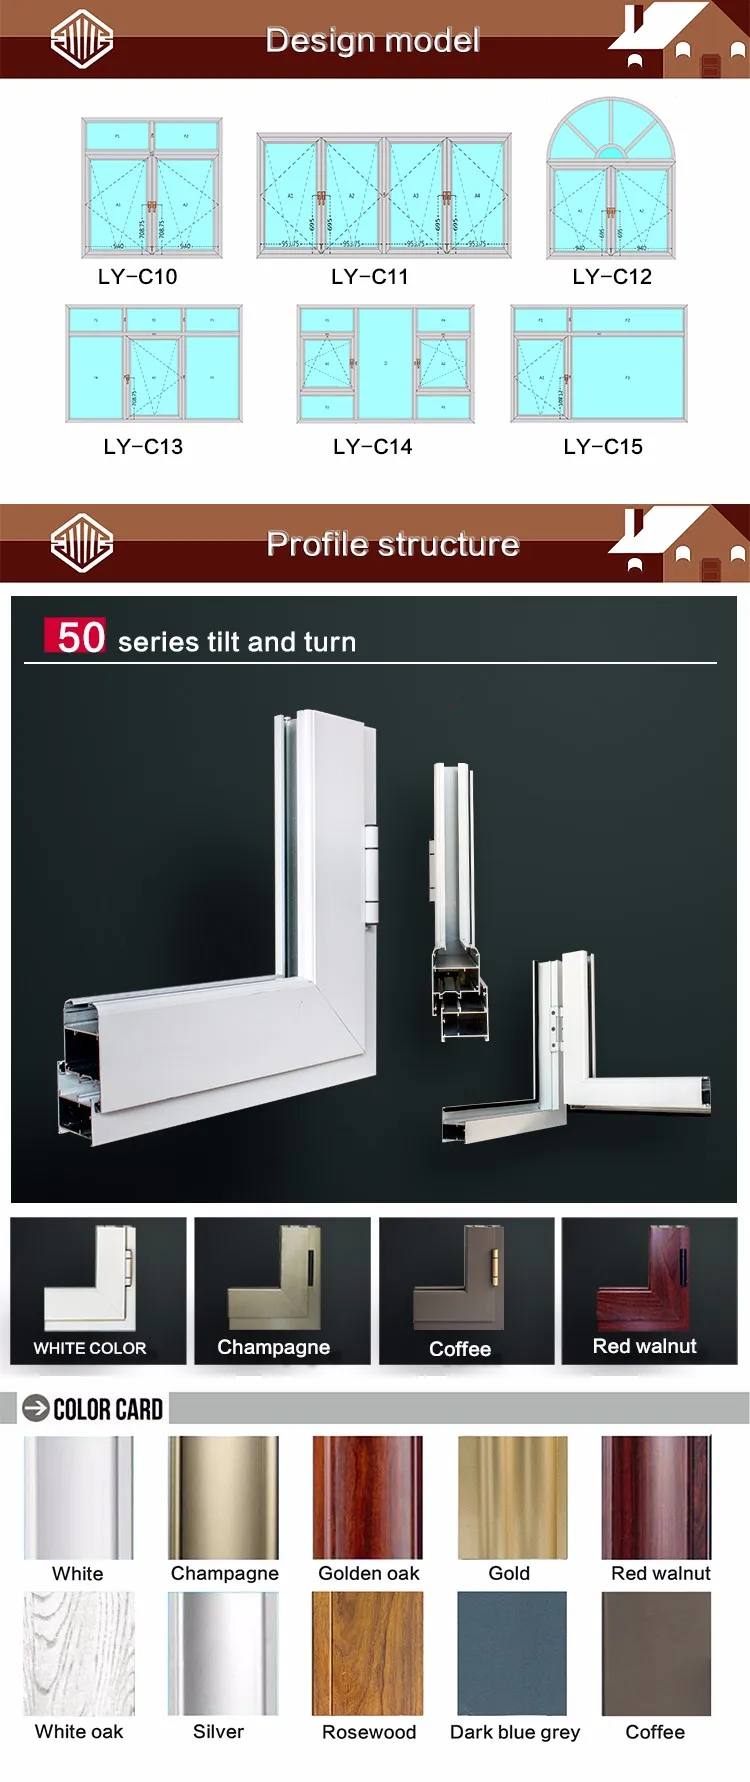 cheap house small windows for sale bathroom window aluminum frame glass window made in china